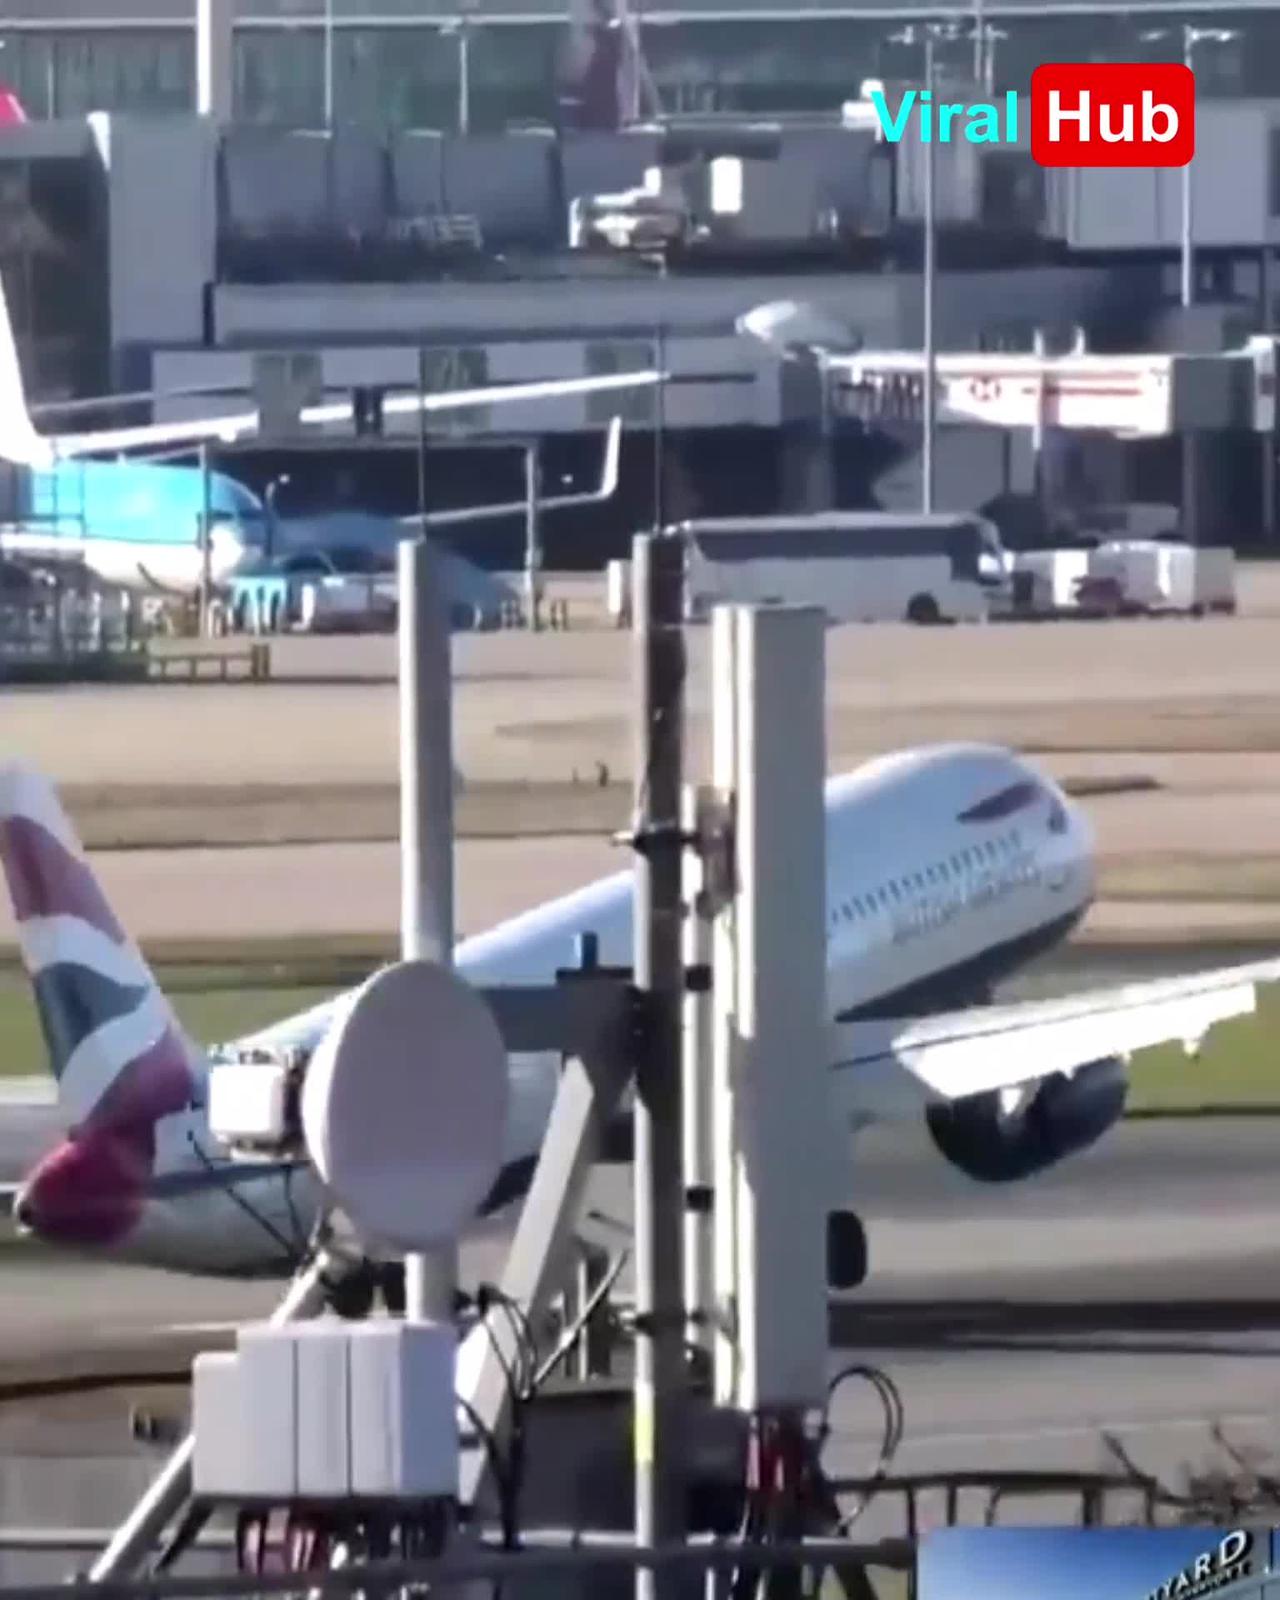 Airplane aborts Landing at London's Heathrow Airport due to High Winds | Viral Hub